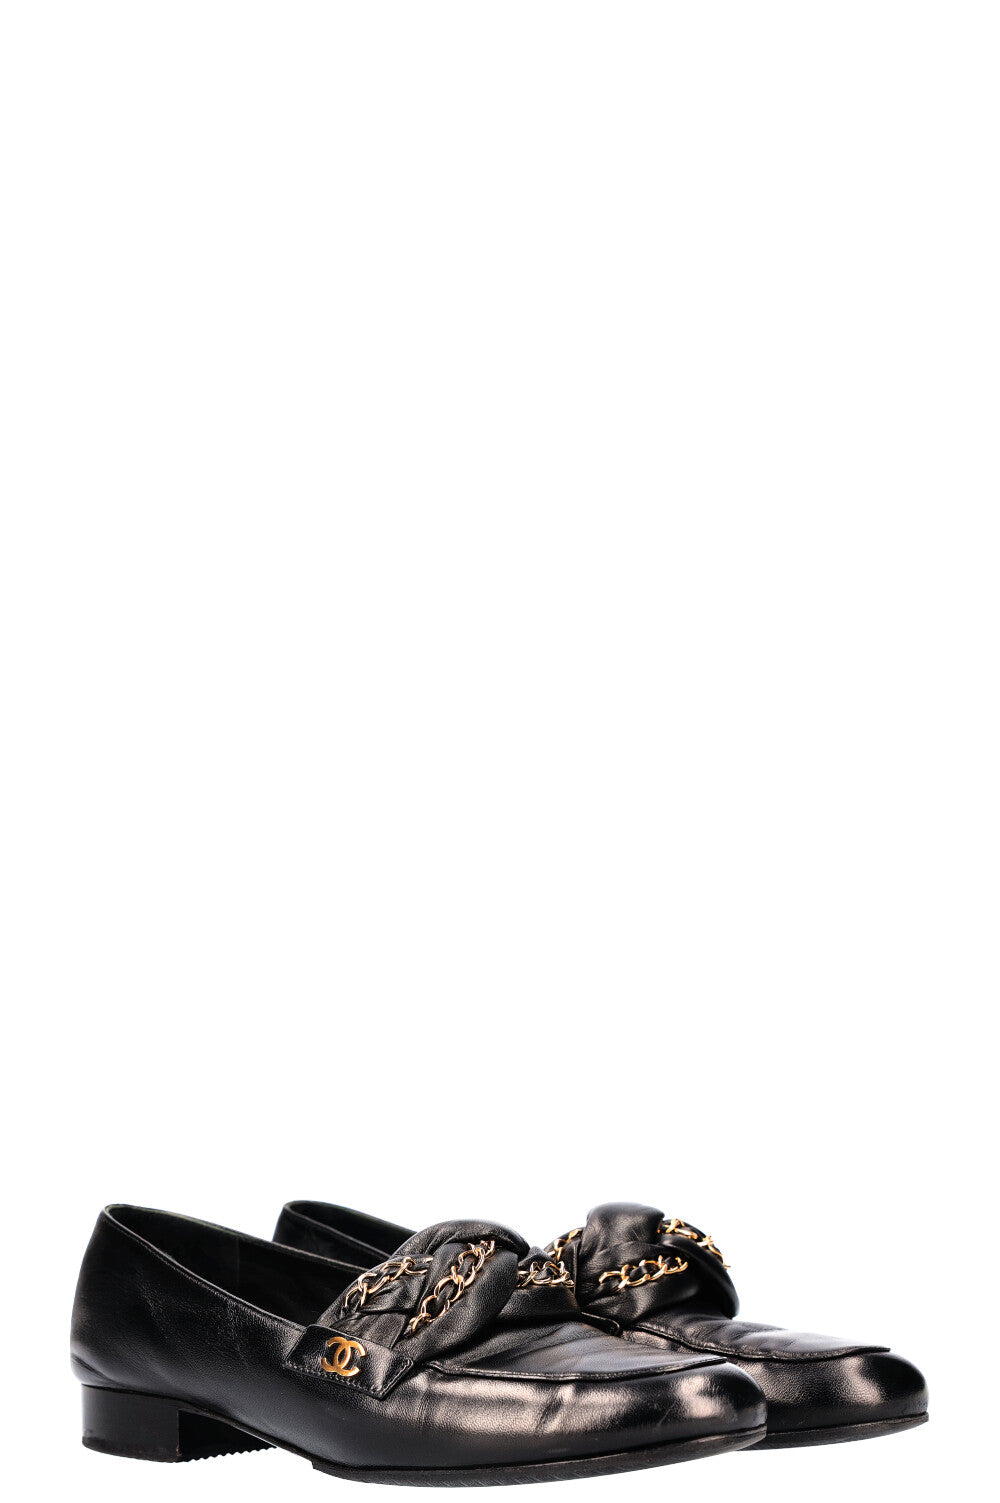 CHANEL Braided Chain Loafers Flats Black